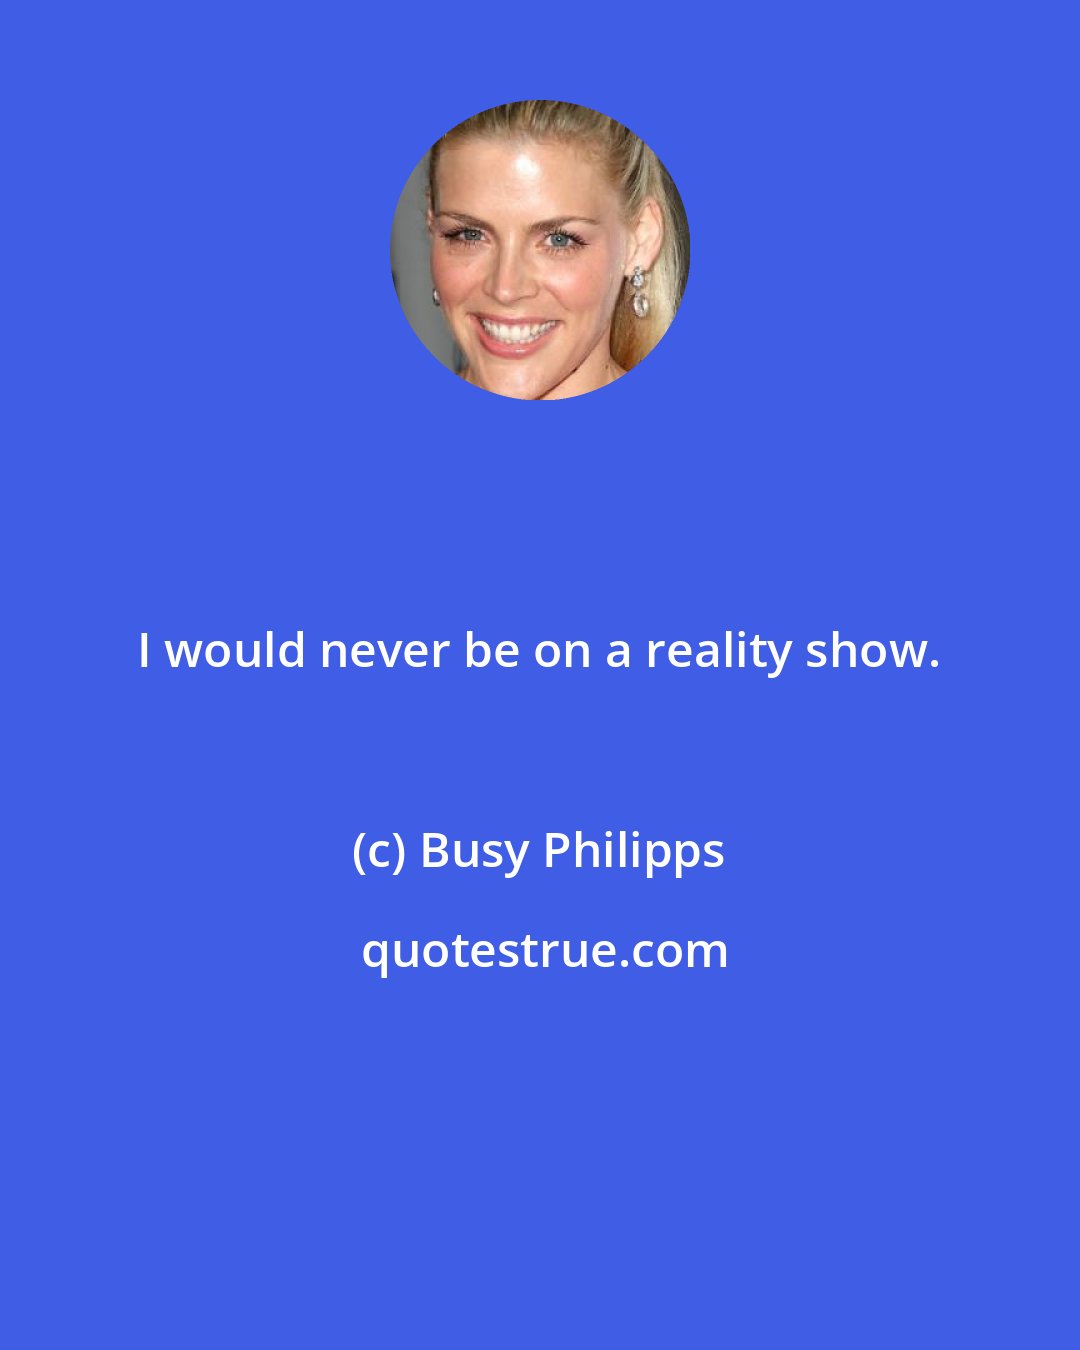 Busy Philipps: I would never be on a reality show.